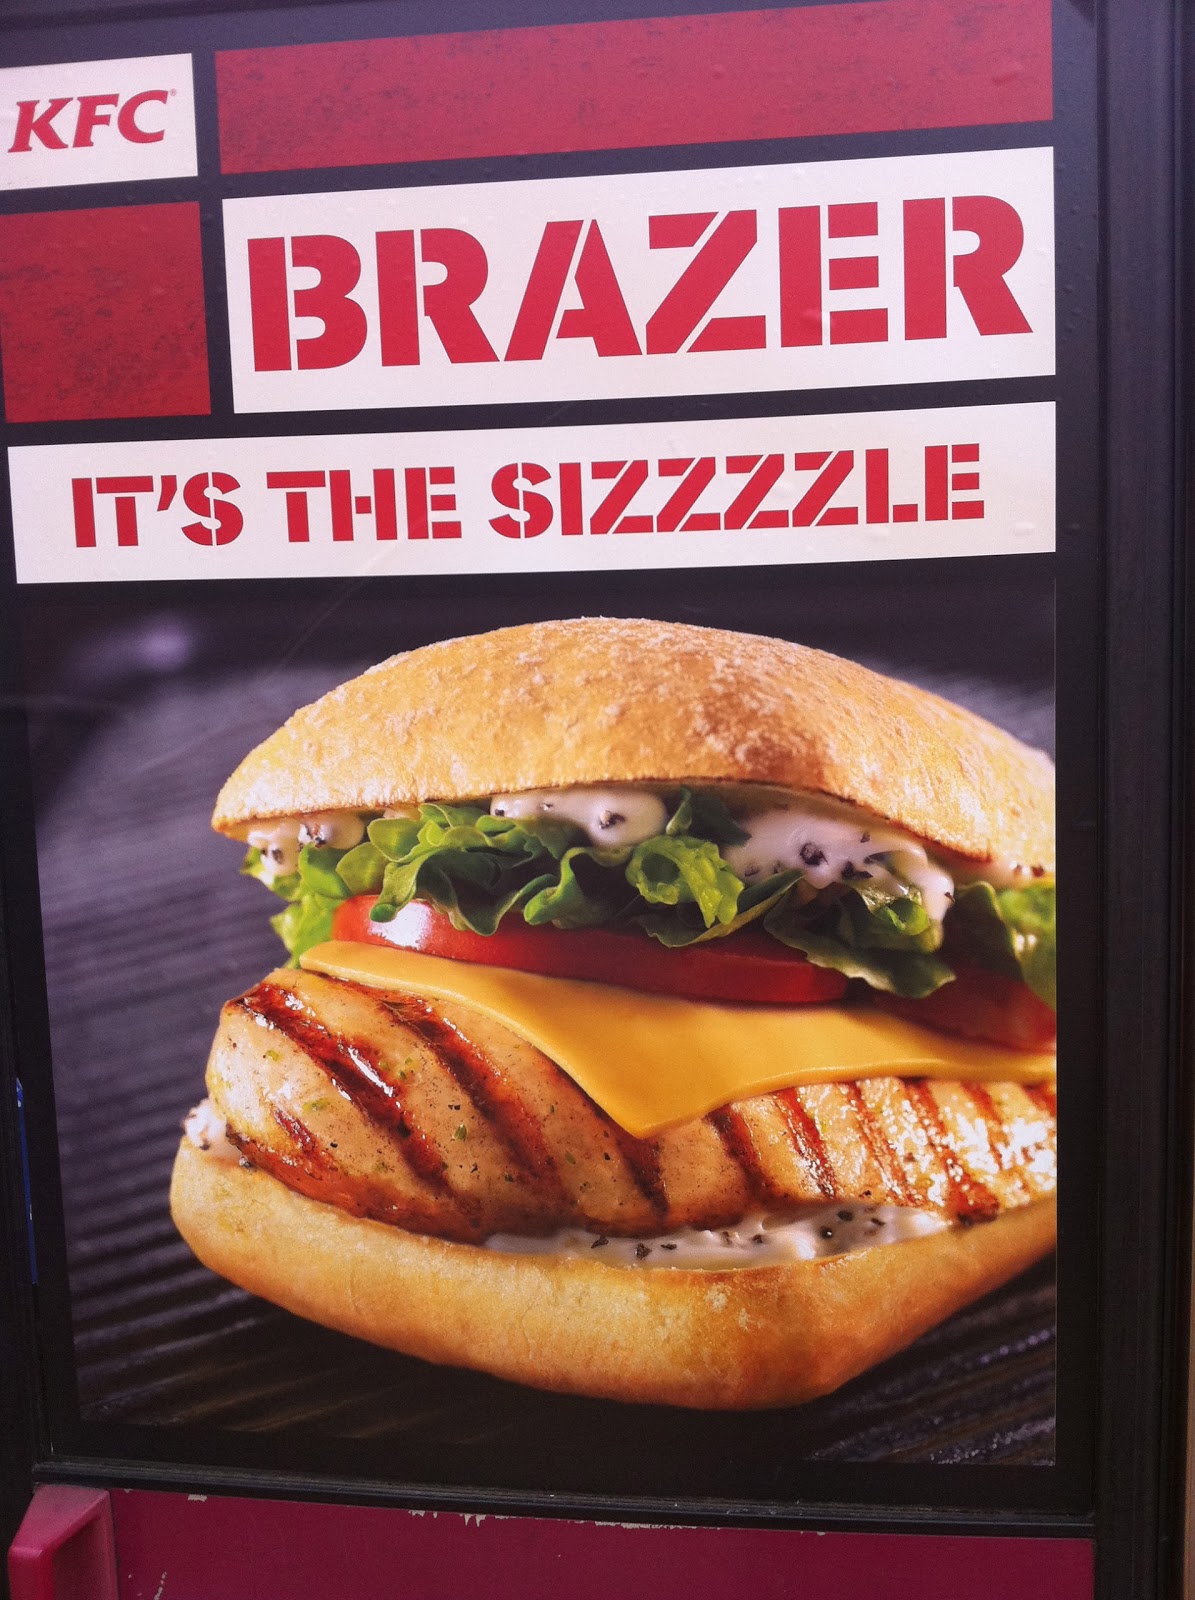 A Review A Day: Today's Review: KFC Brazer